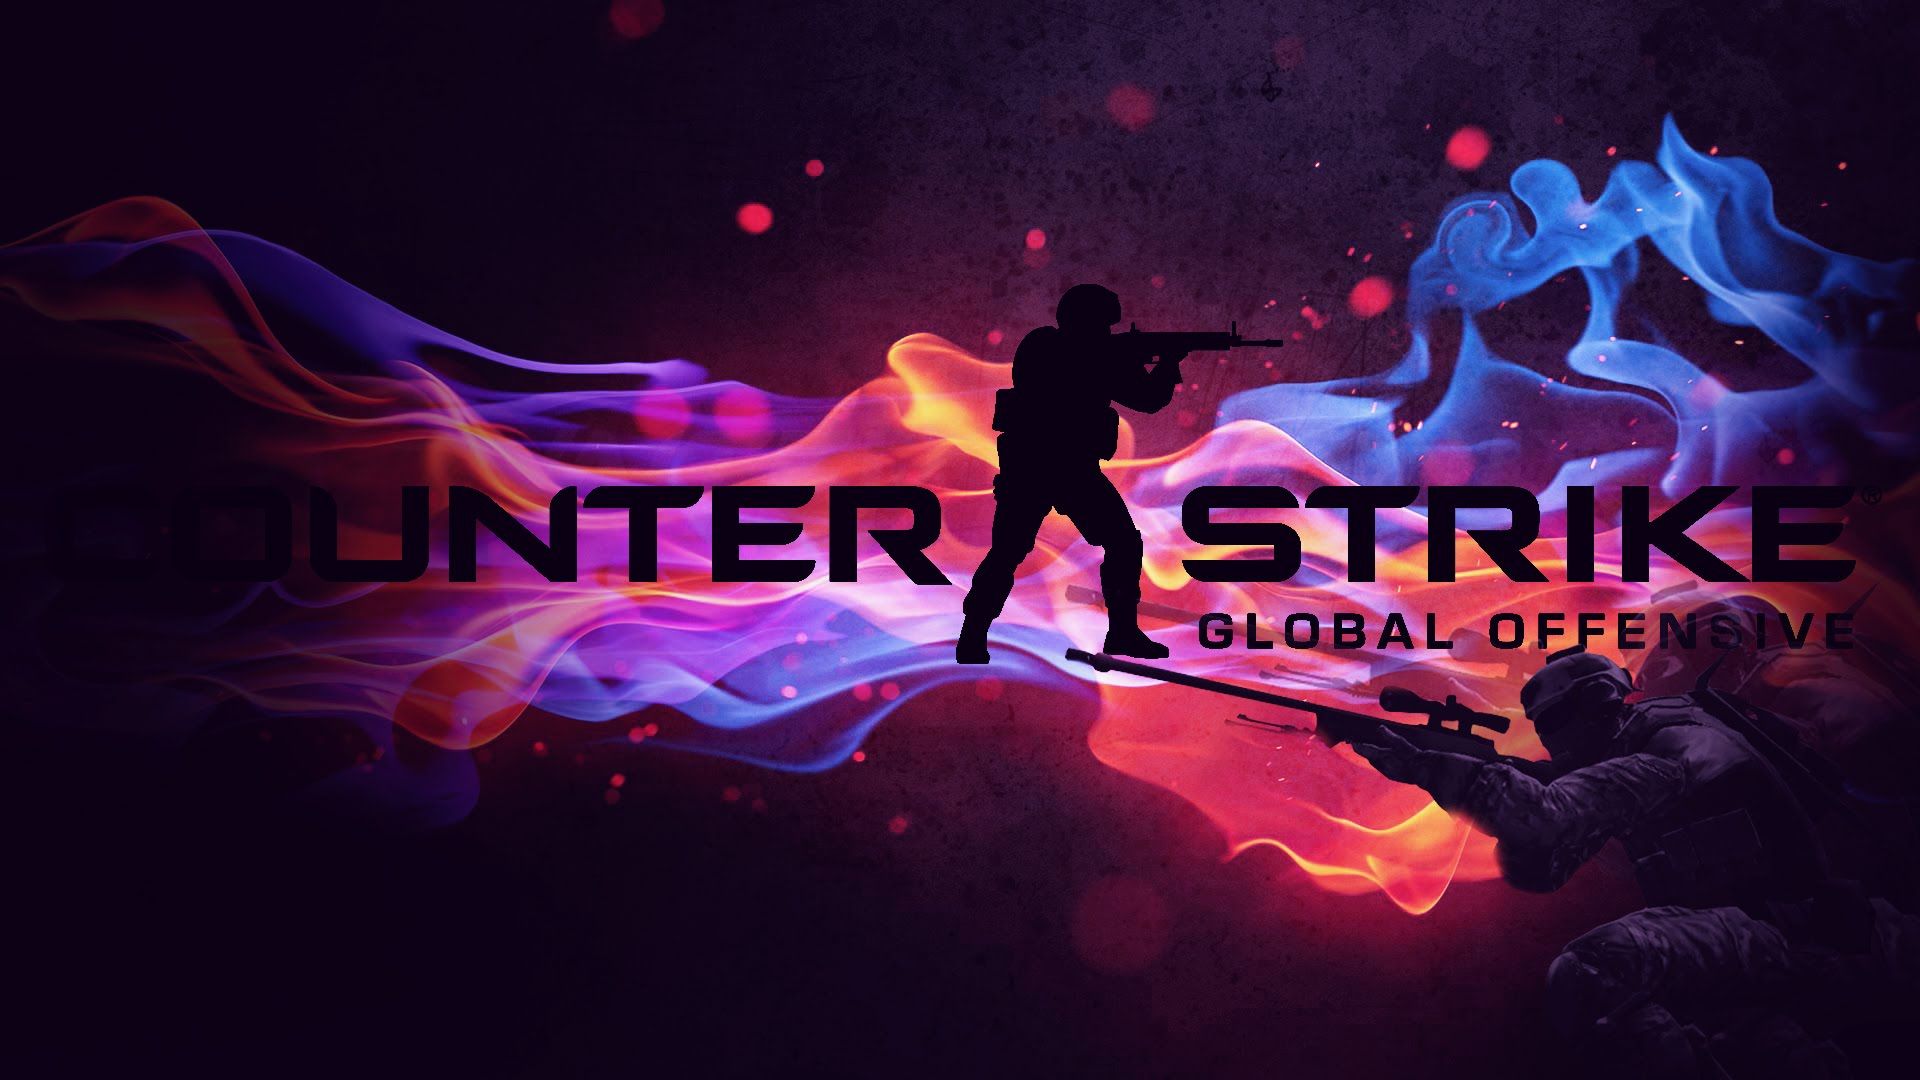 Counter Strike Global Offensive Wallpaper - YouTube